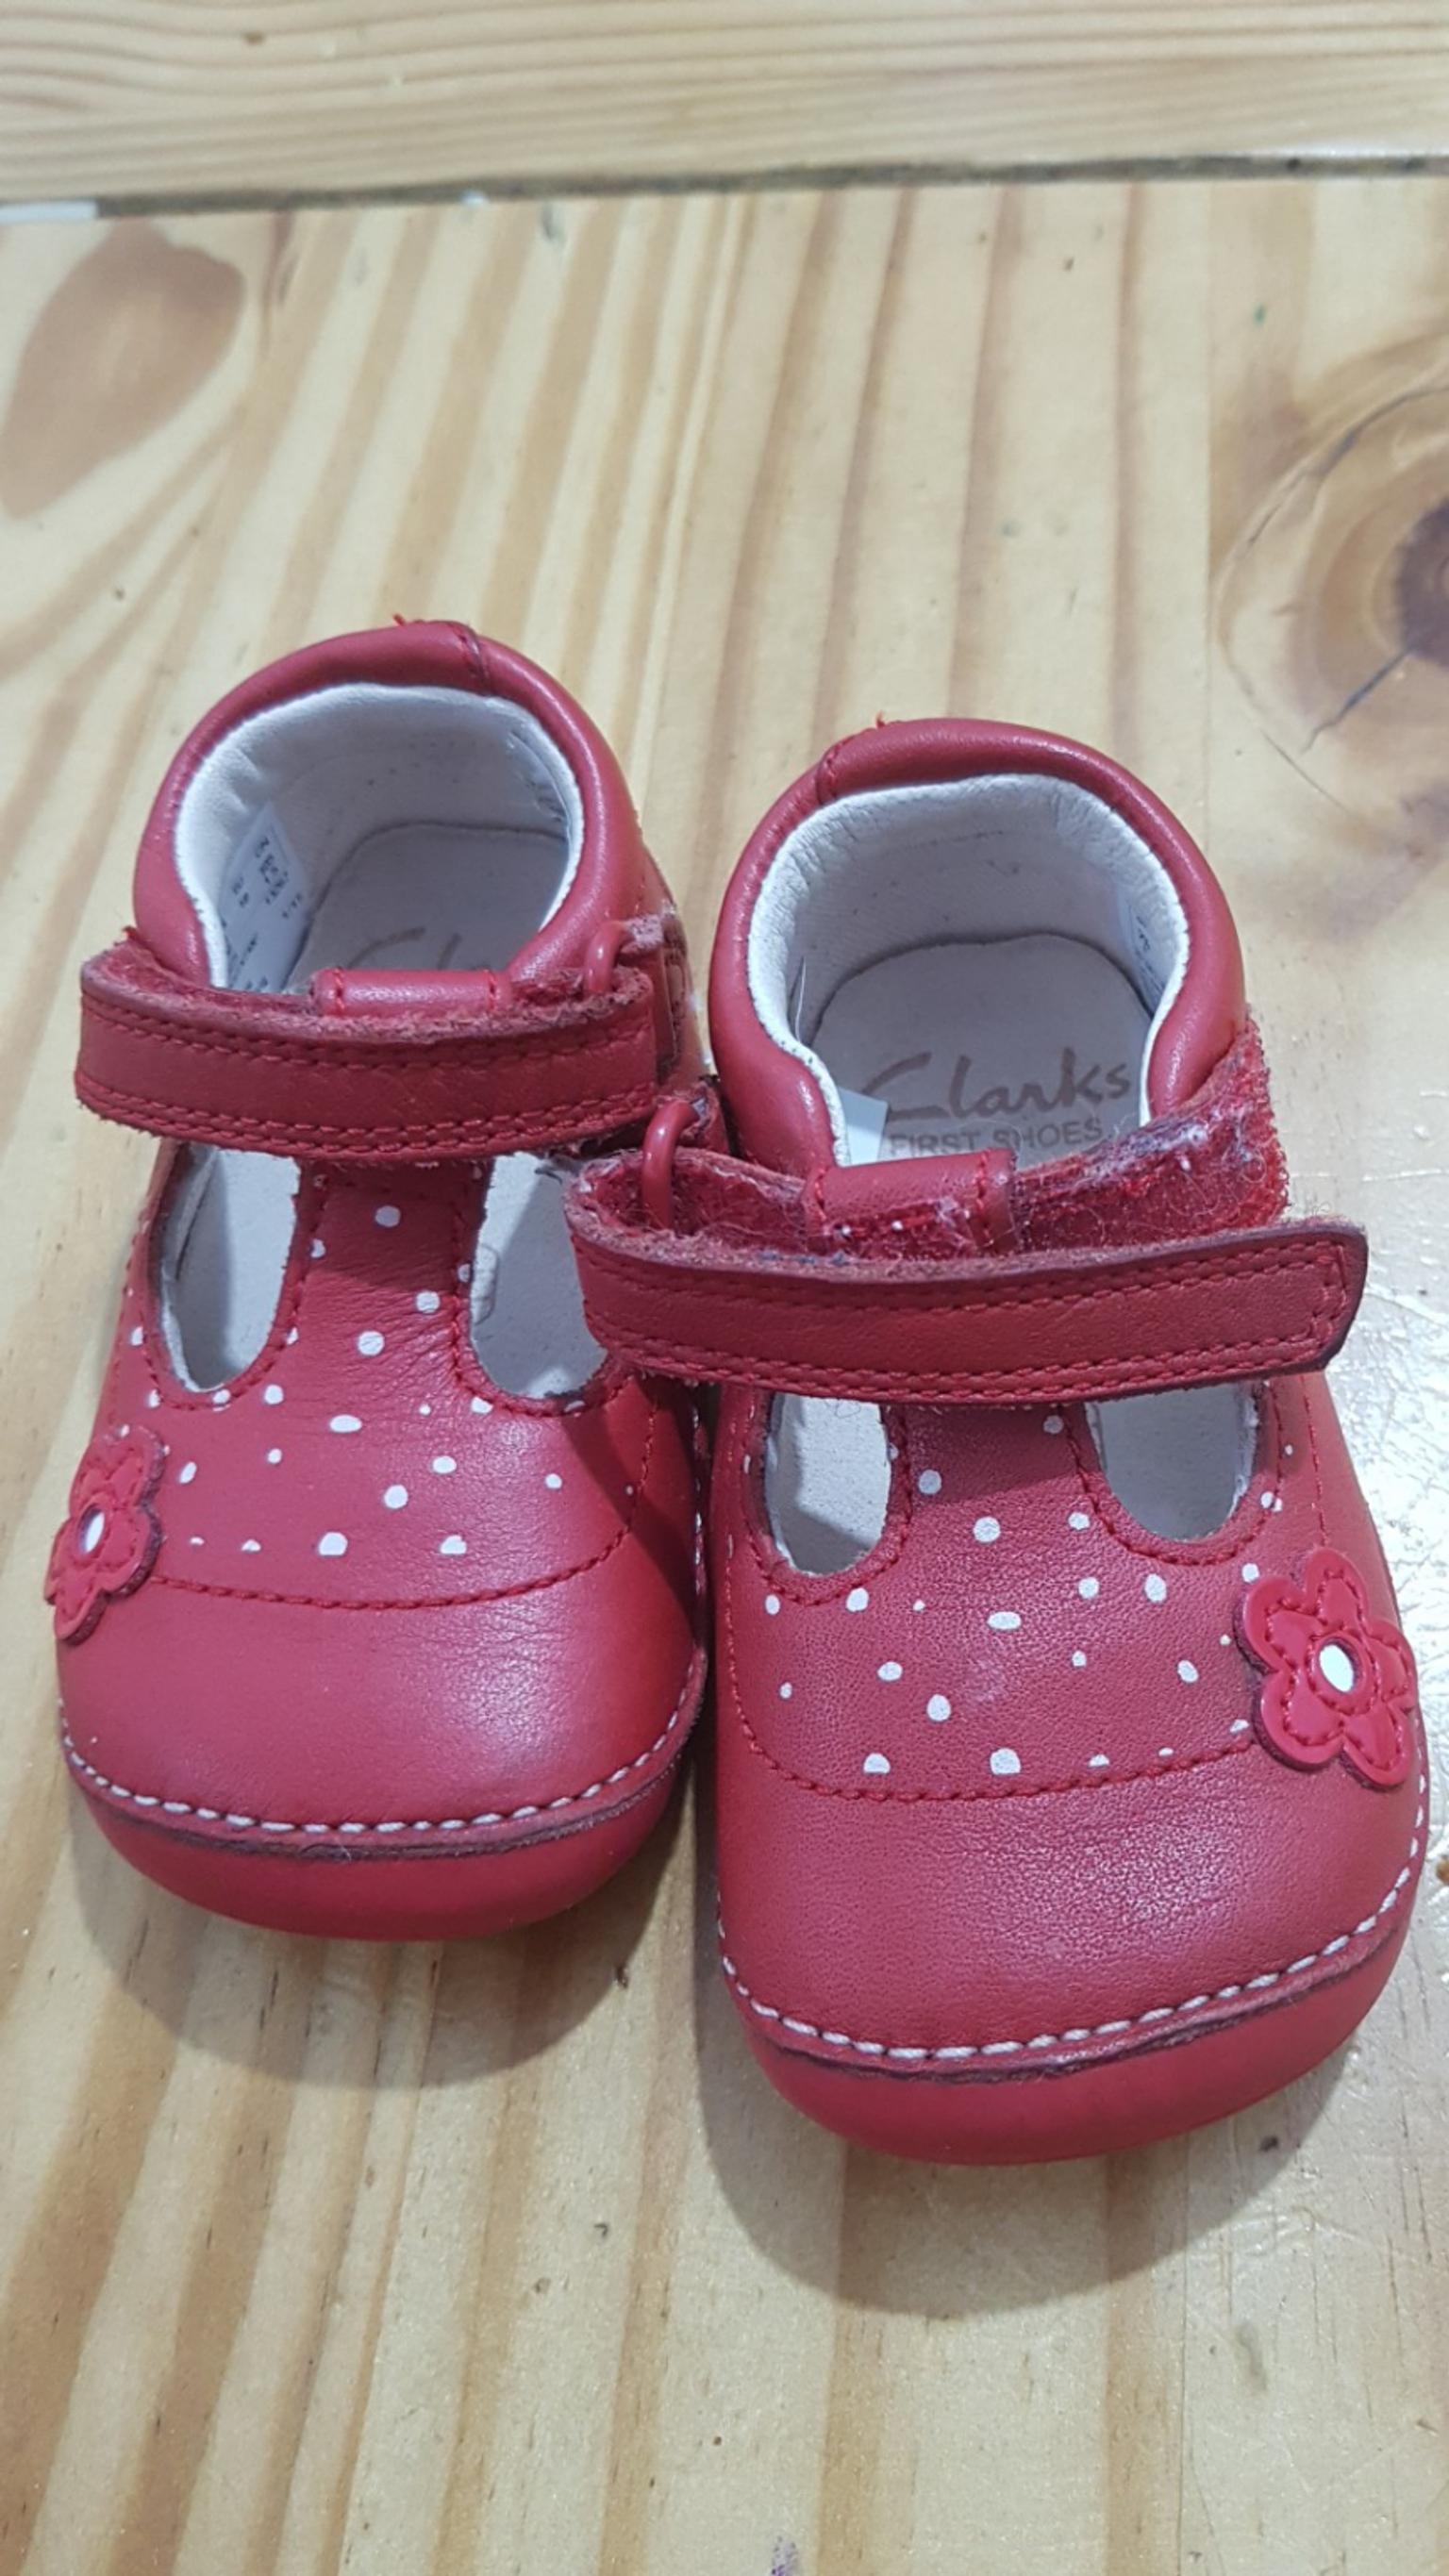 clarks shoes baby shoes